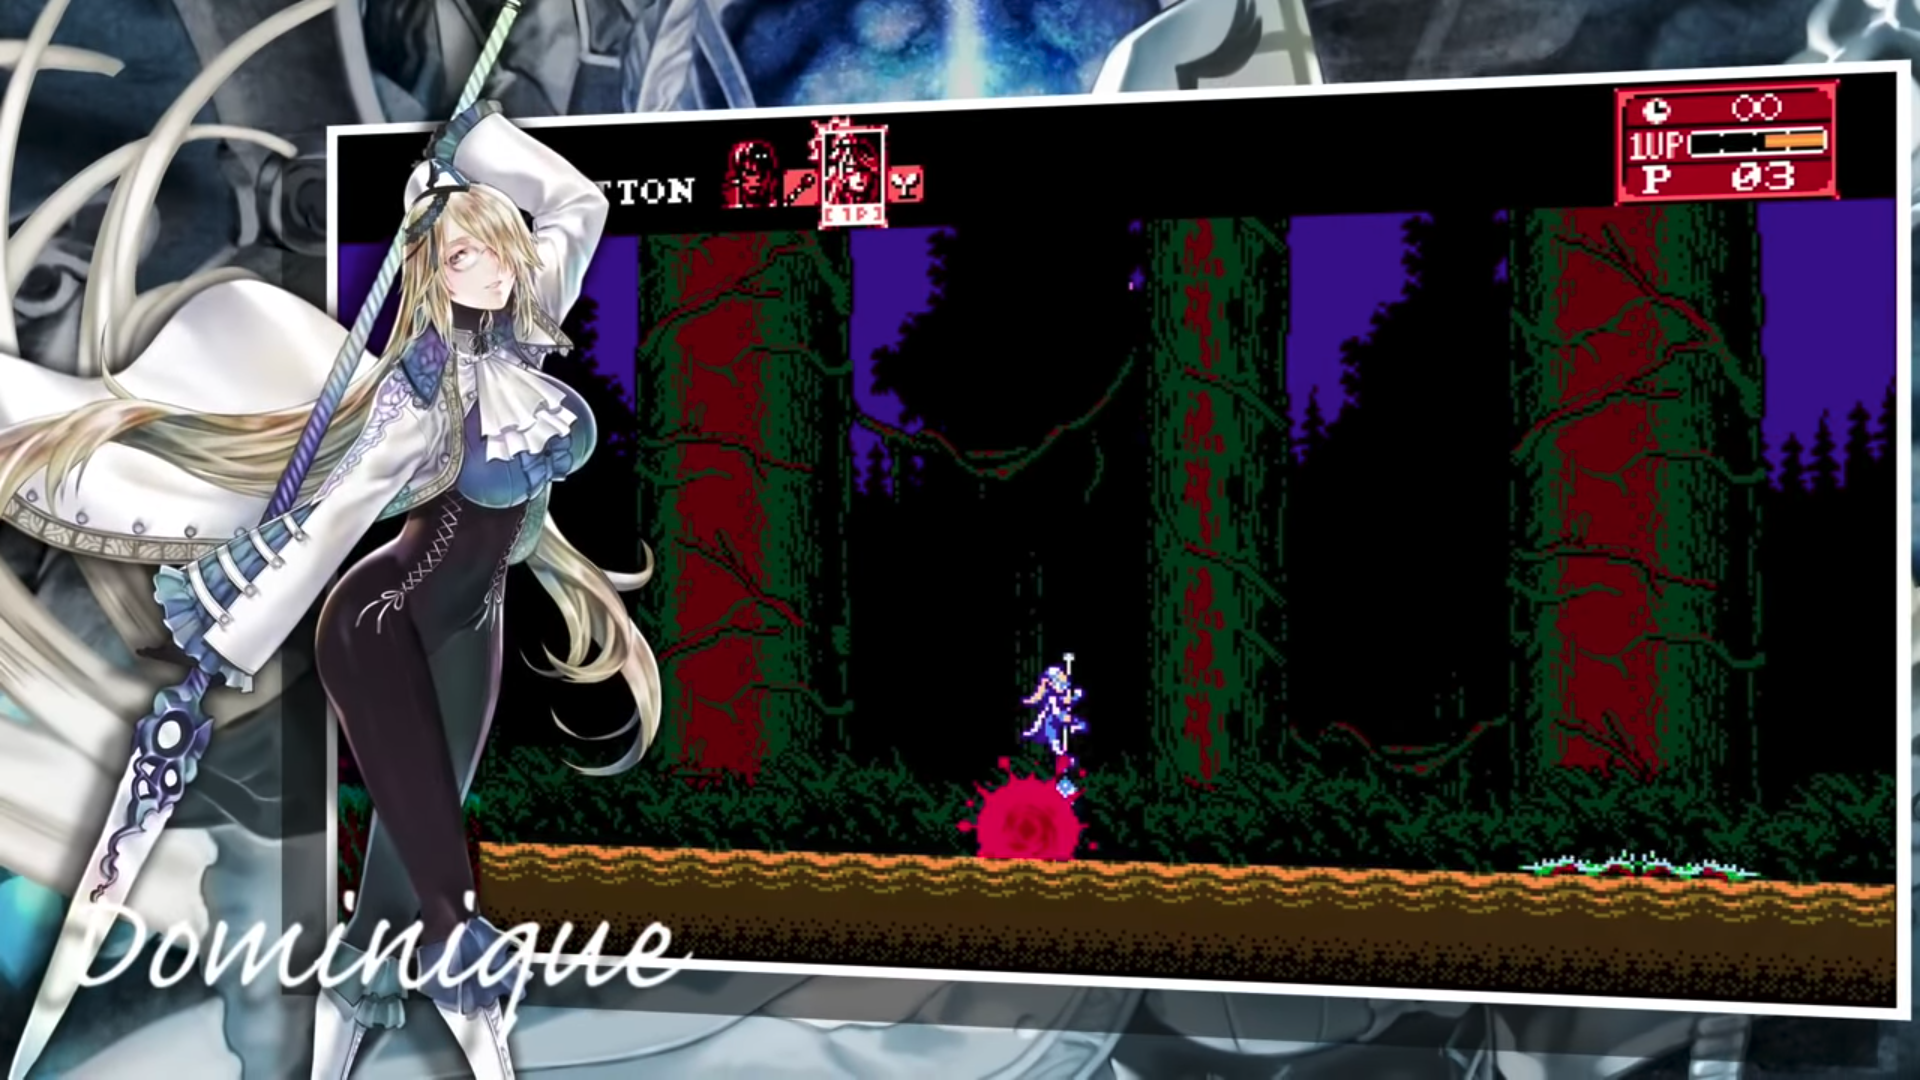 Bloodstained Curse of the Moon 2. Bloodstained Curse of the Moon. Bloodstained Curse of the Moon 2 1.1 2. Луна 2 игра